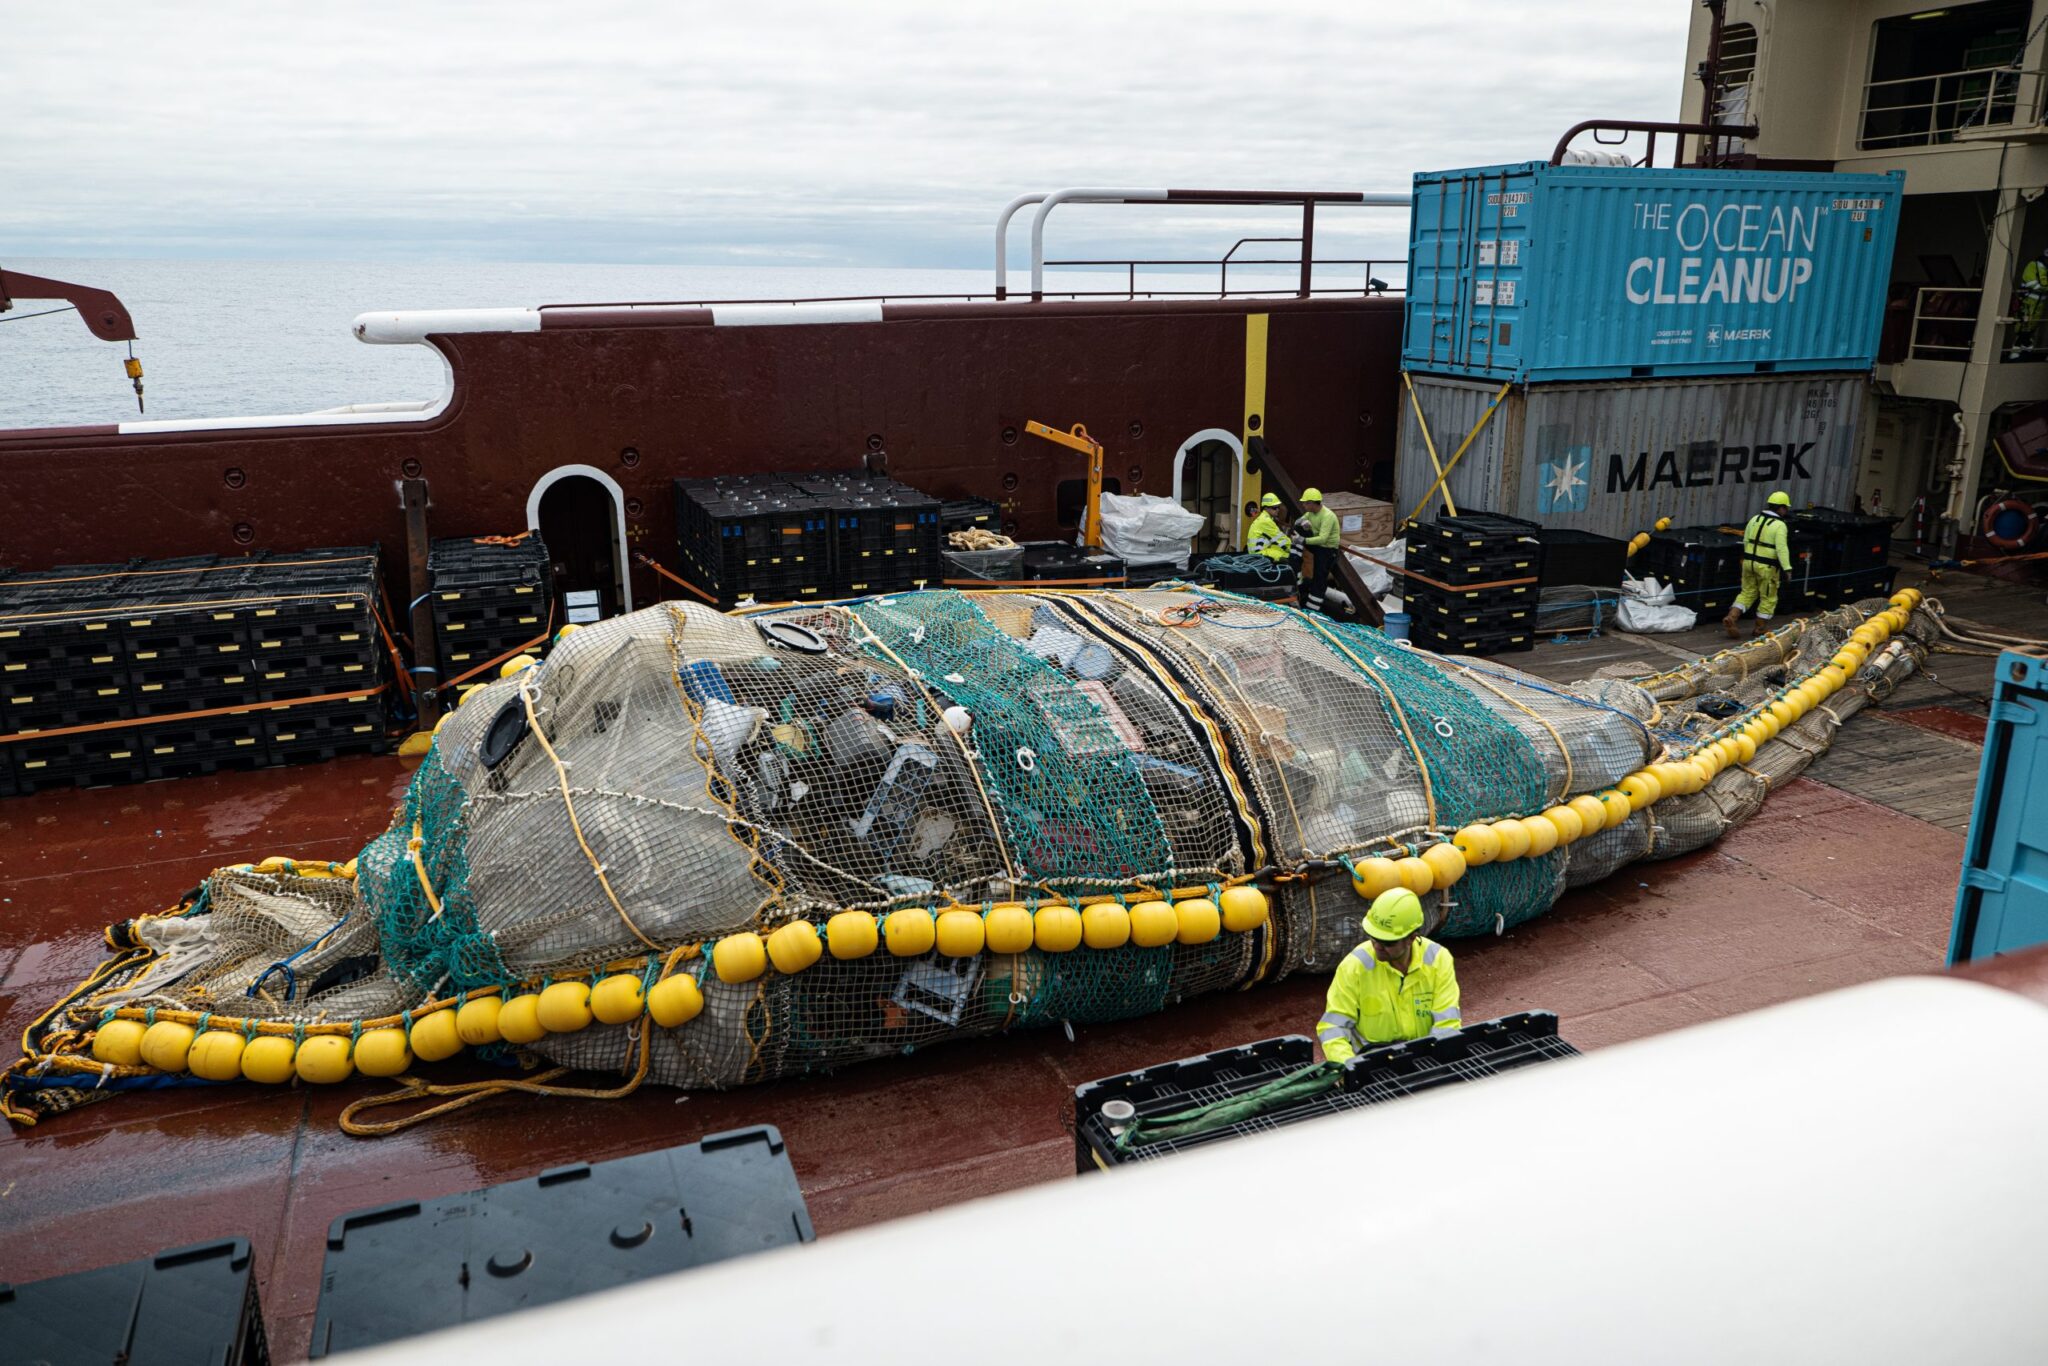 A net full of plastic pollution collectedfrom the ocean sits on a ship belonging to The Ocean Cleanup